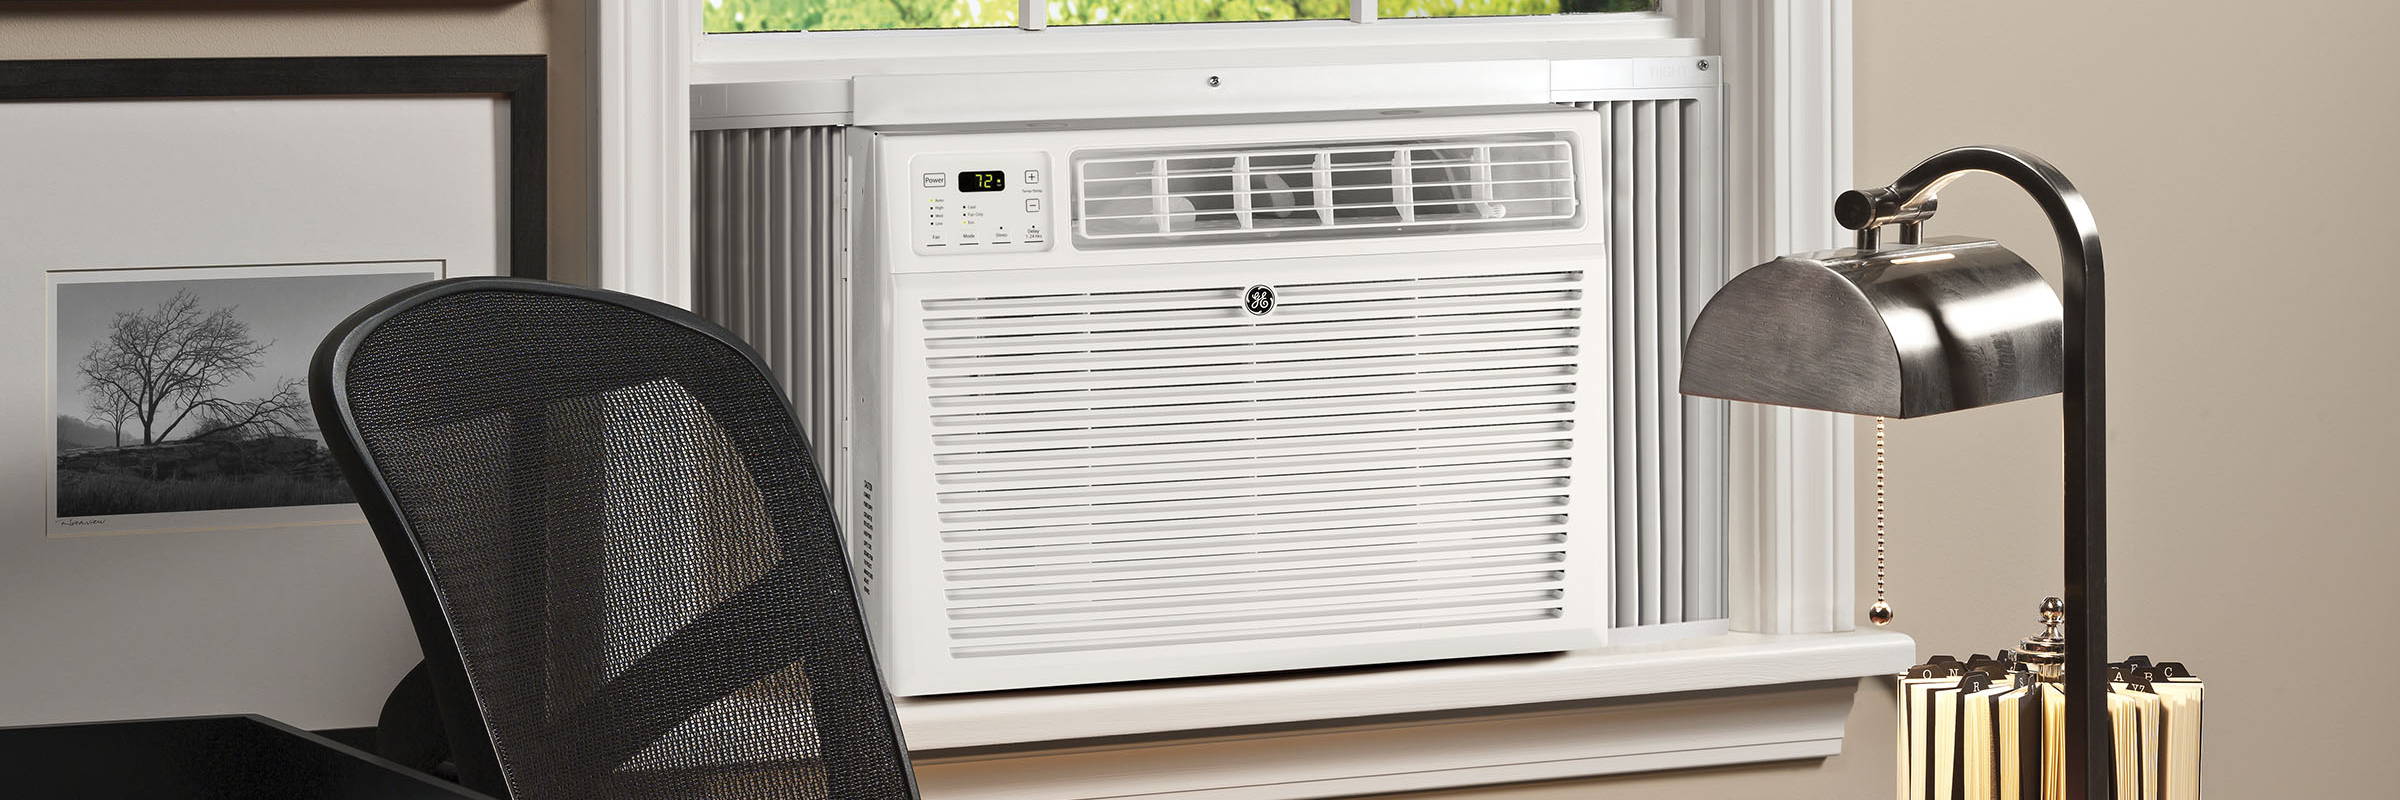 Room Air Conditioners - Window, Built-in and Portable | GE Appliances